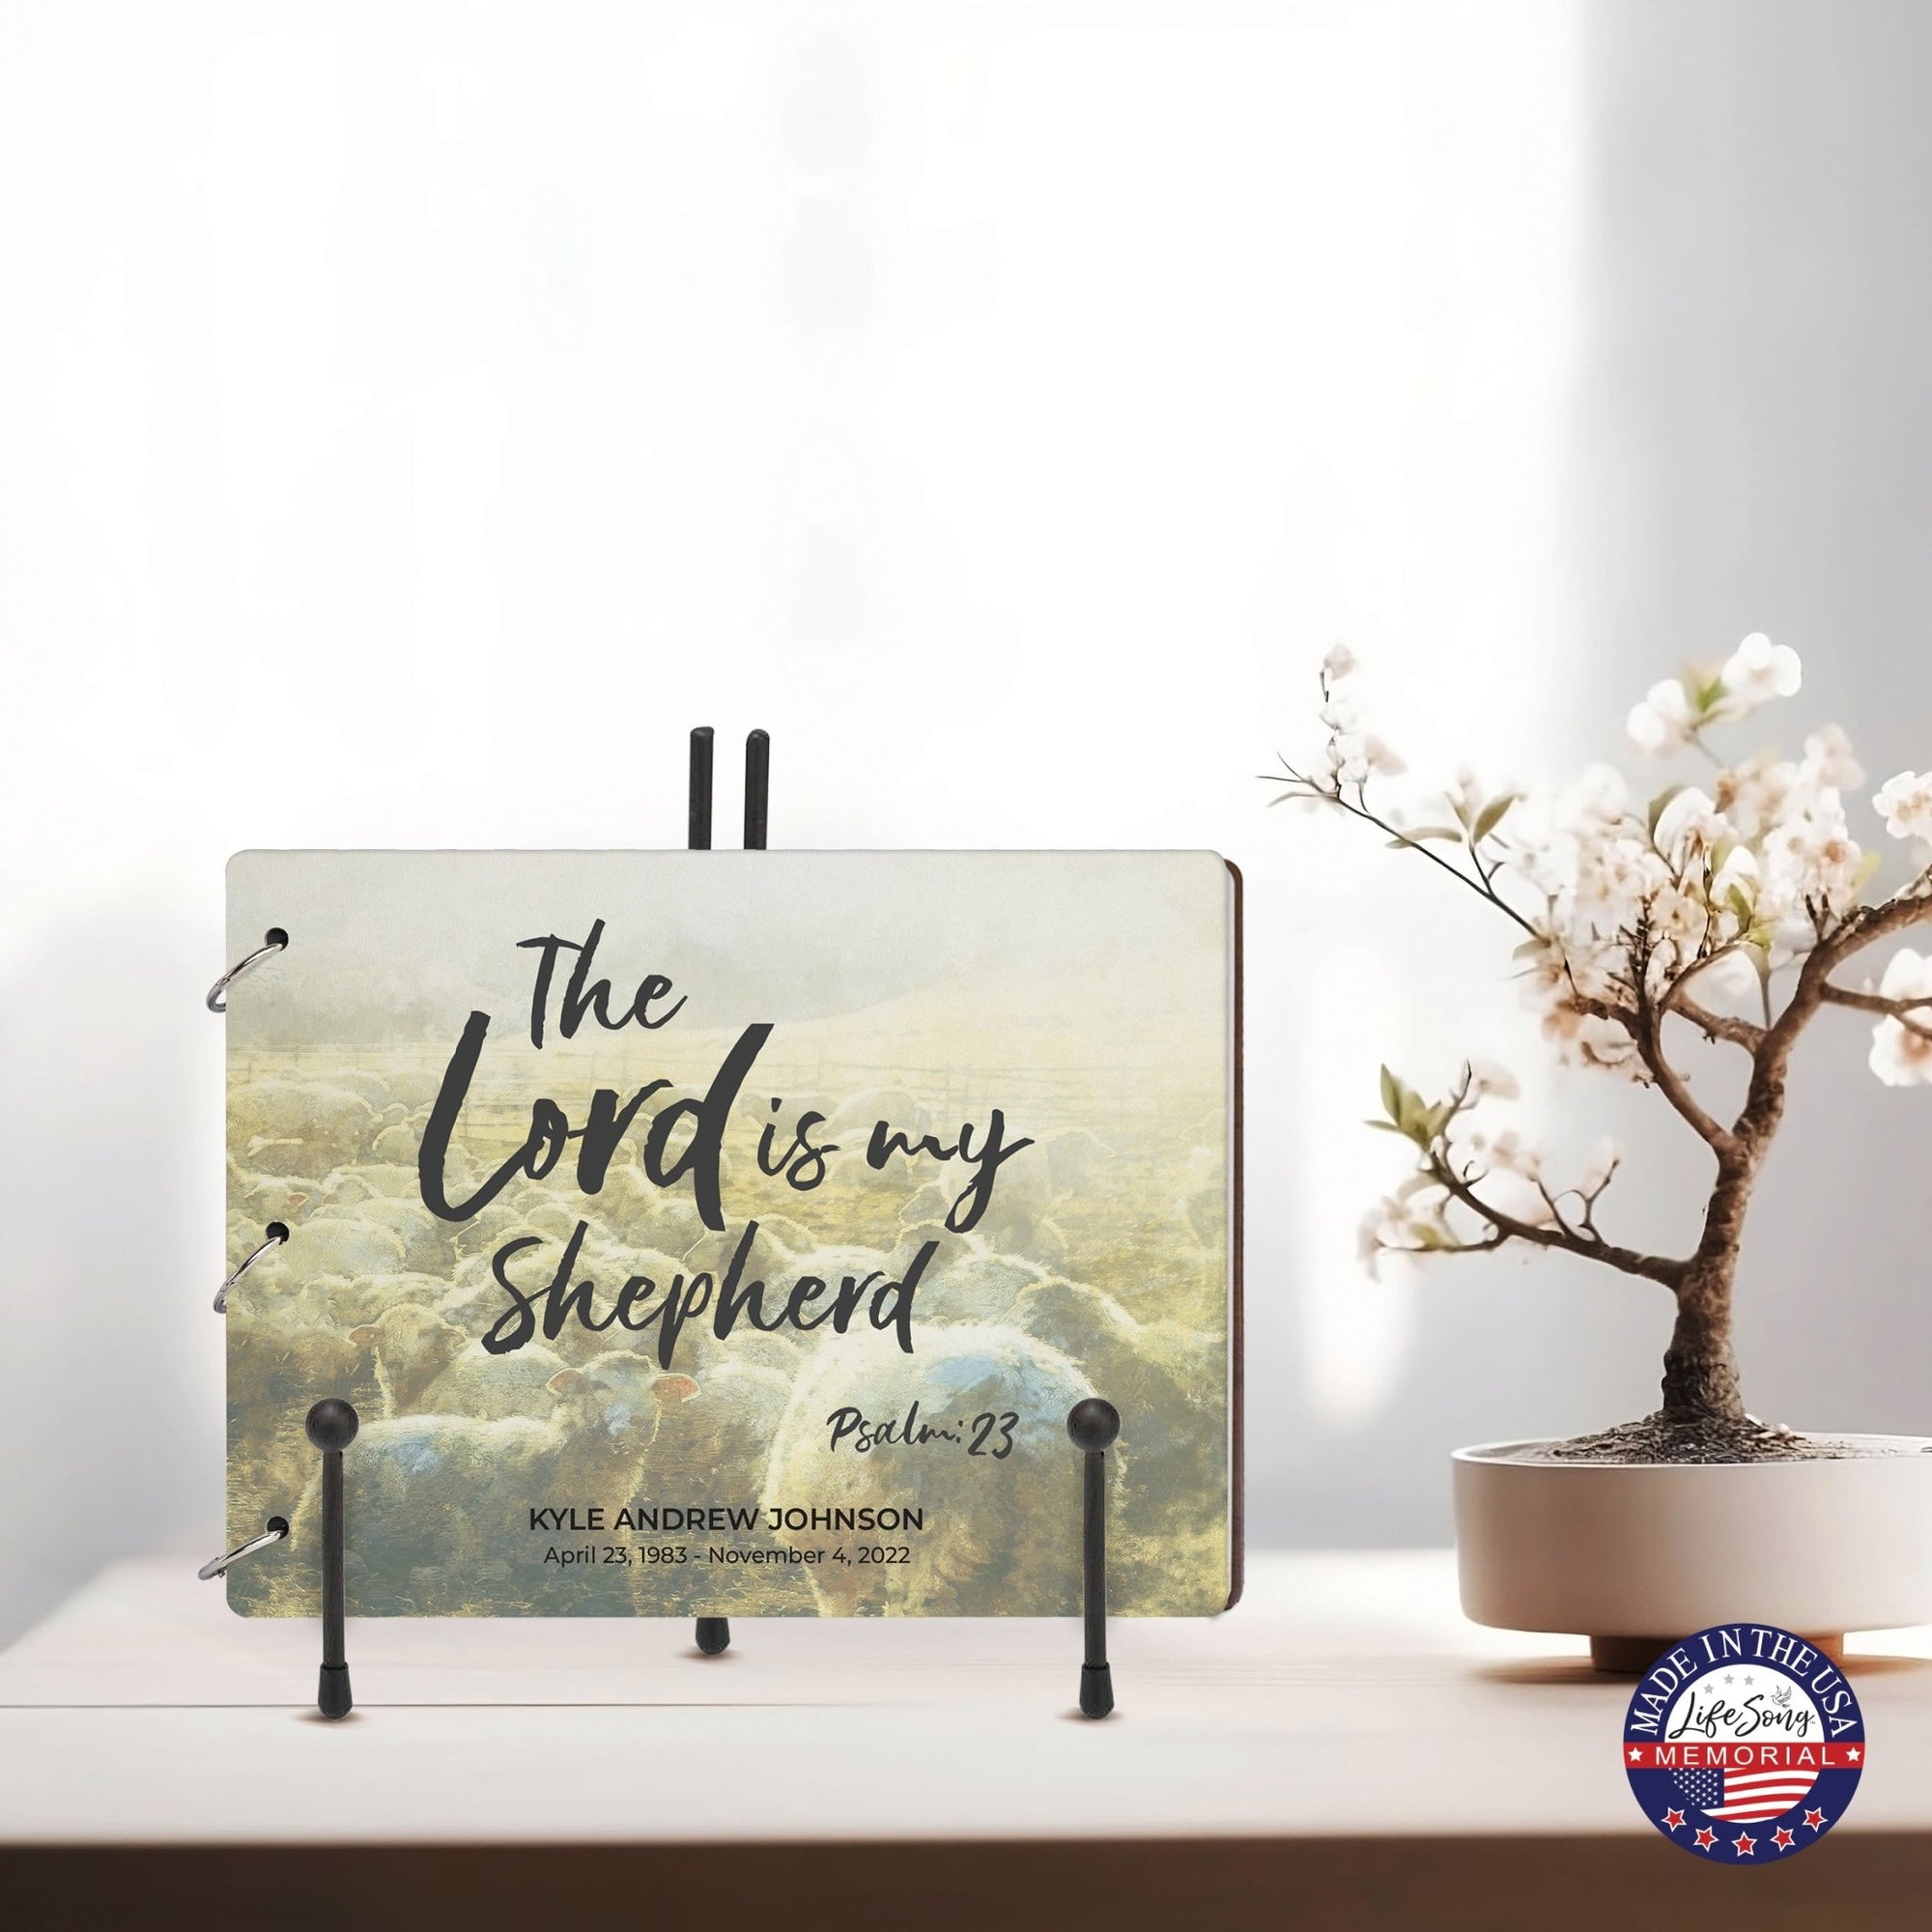 Personalized Celebration Of Life Funeral Guest Books For Memorial Services Registry With Wooden Cover - The Lord Is My Shepherd - LifeSong Milestones